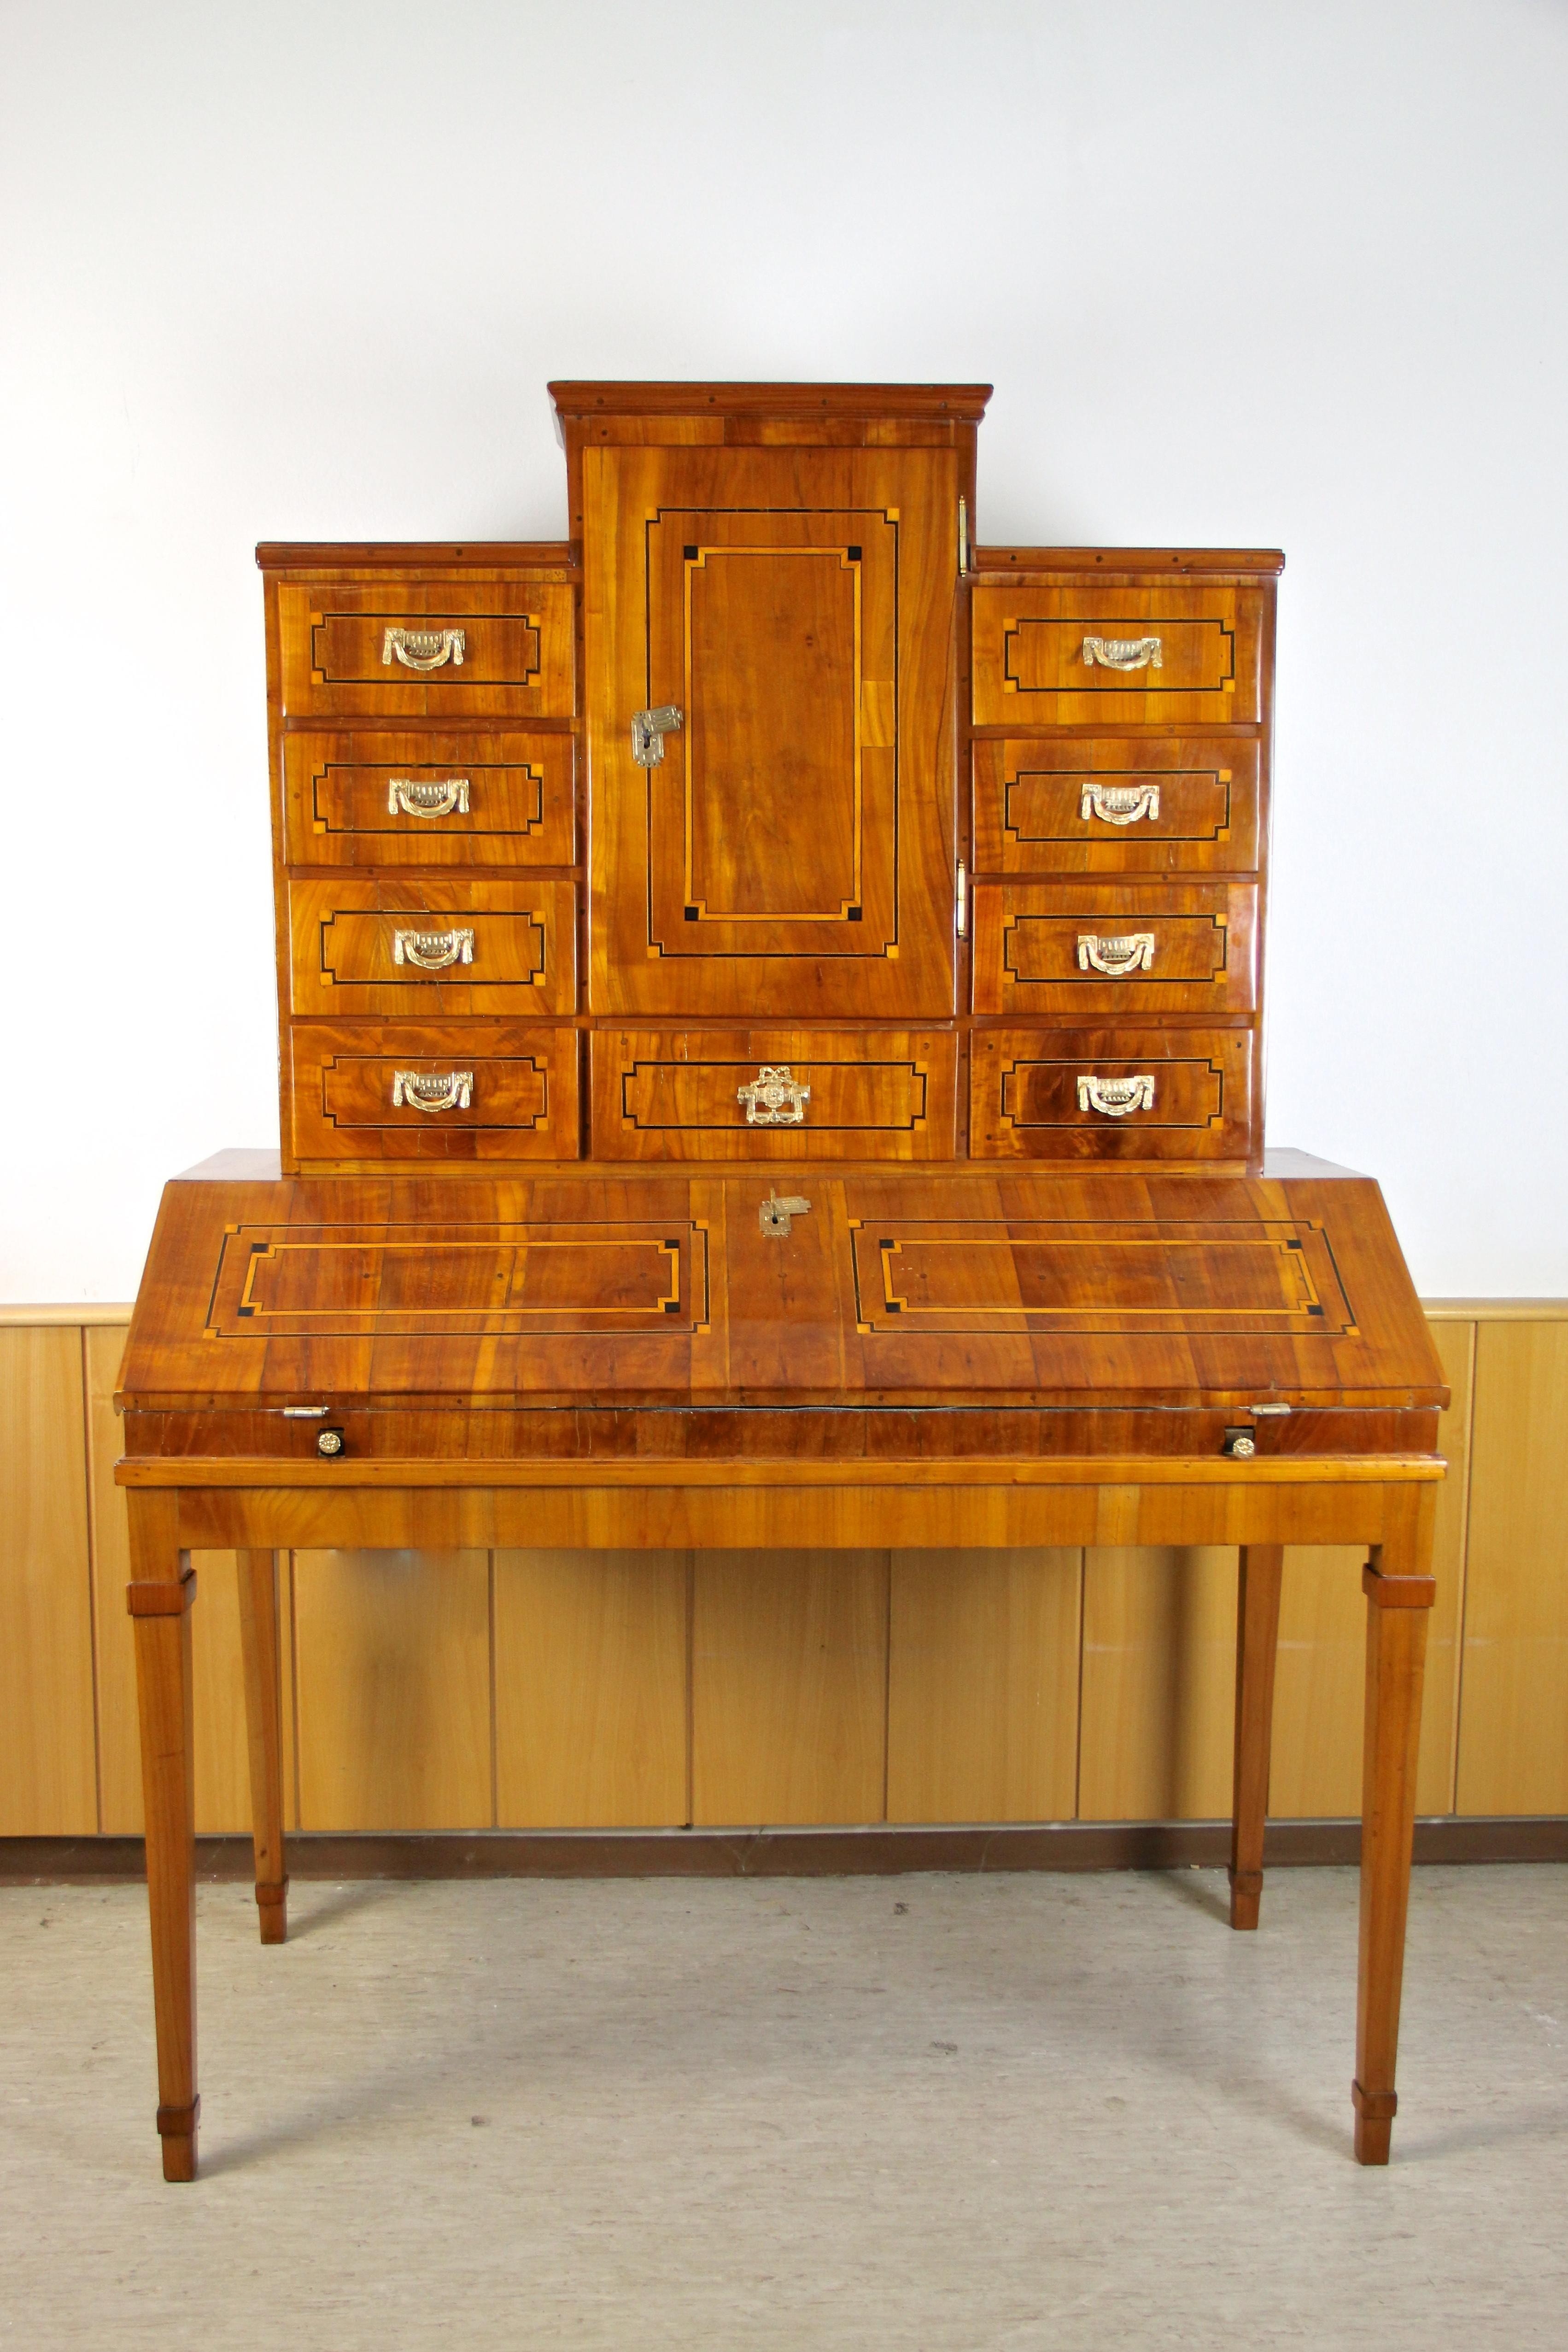 Extraordinary 18th century writing Secretaire made of fine cherry wood in the so-called 